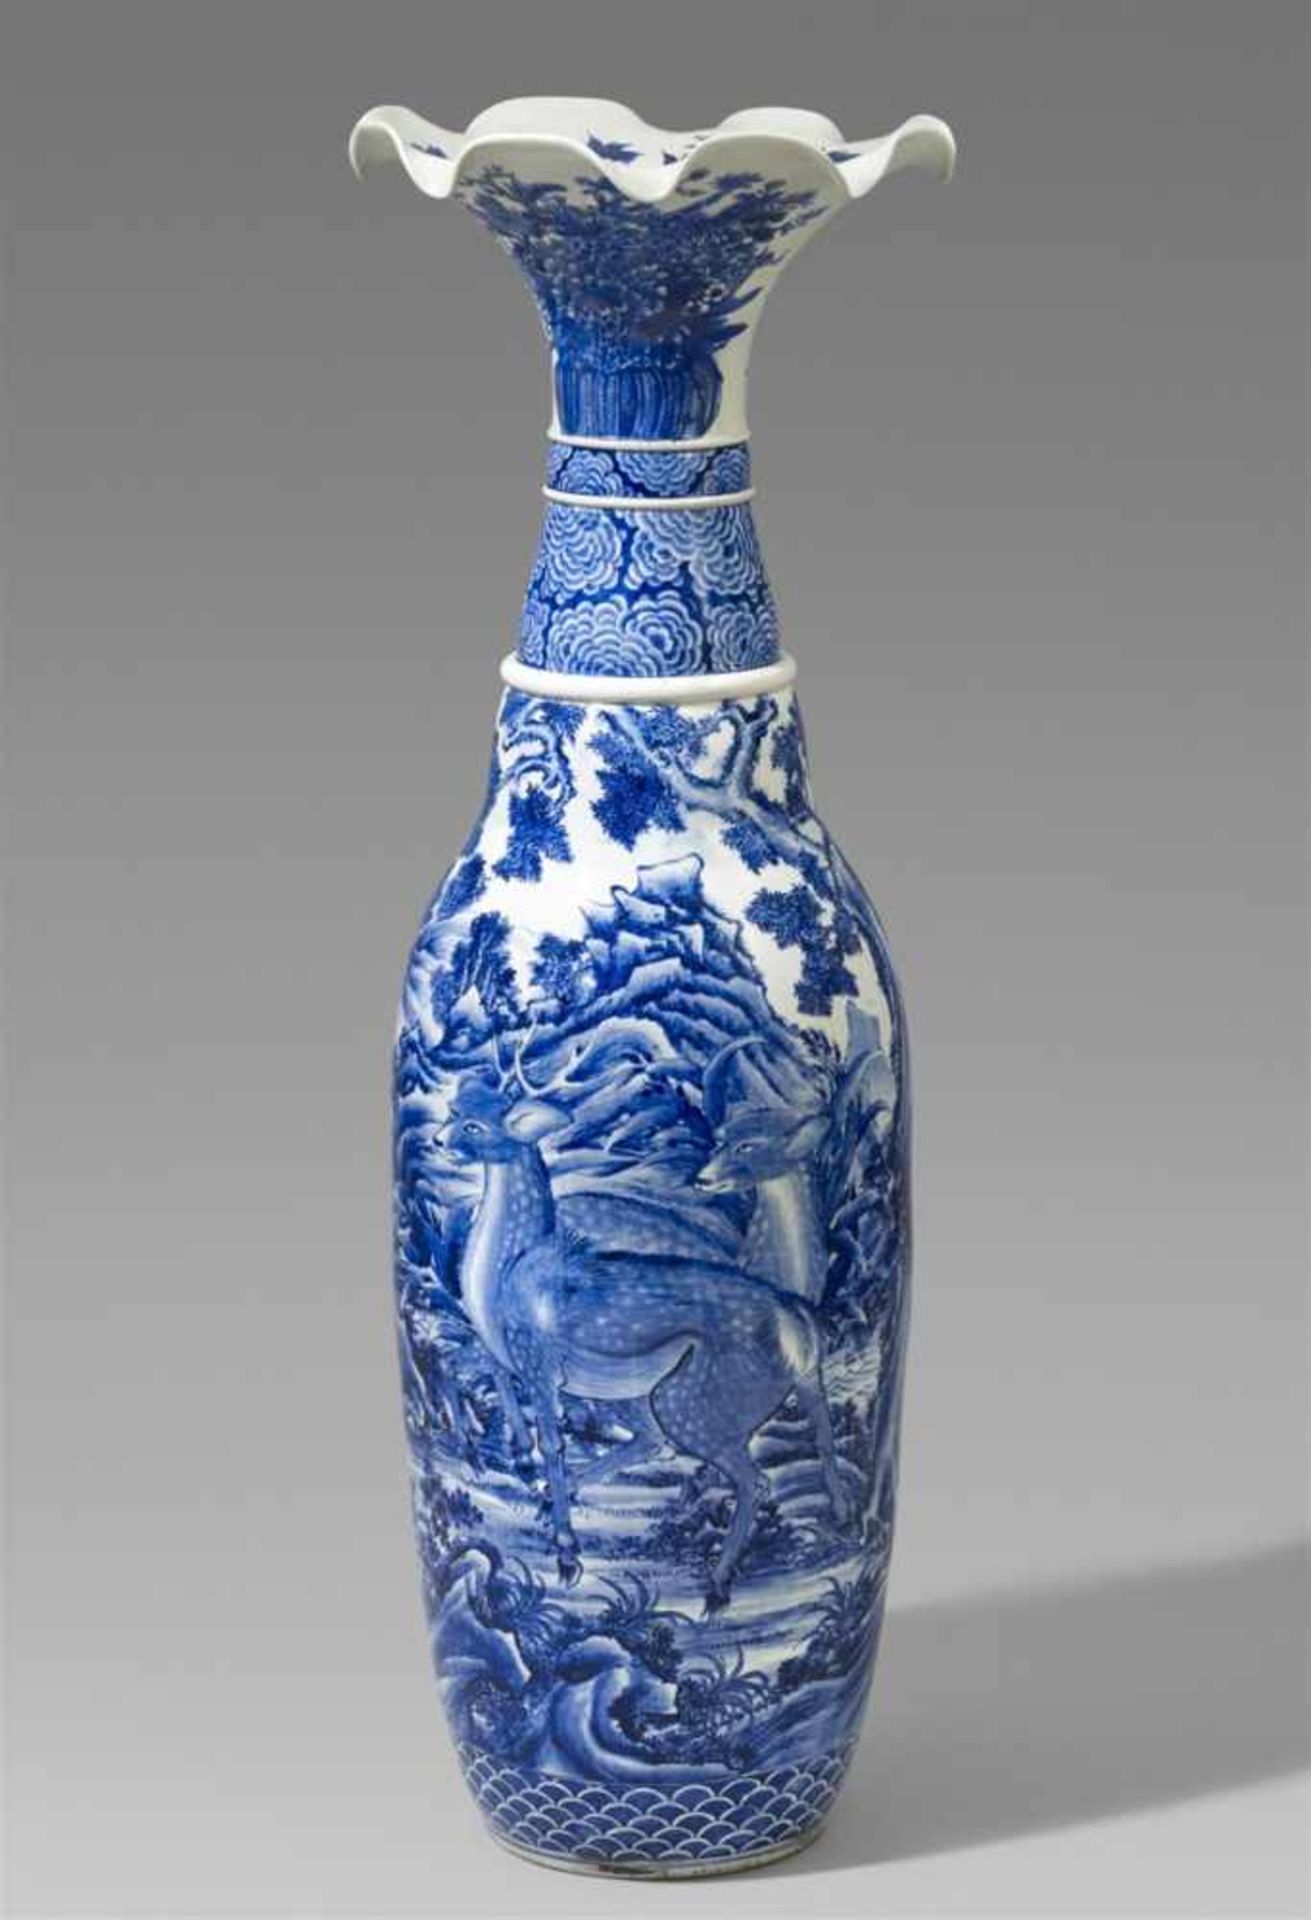 A very large Seto vase. Late 19th century